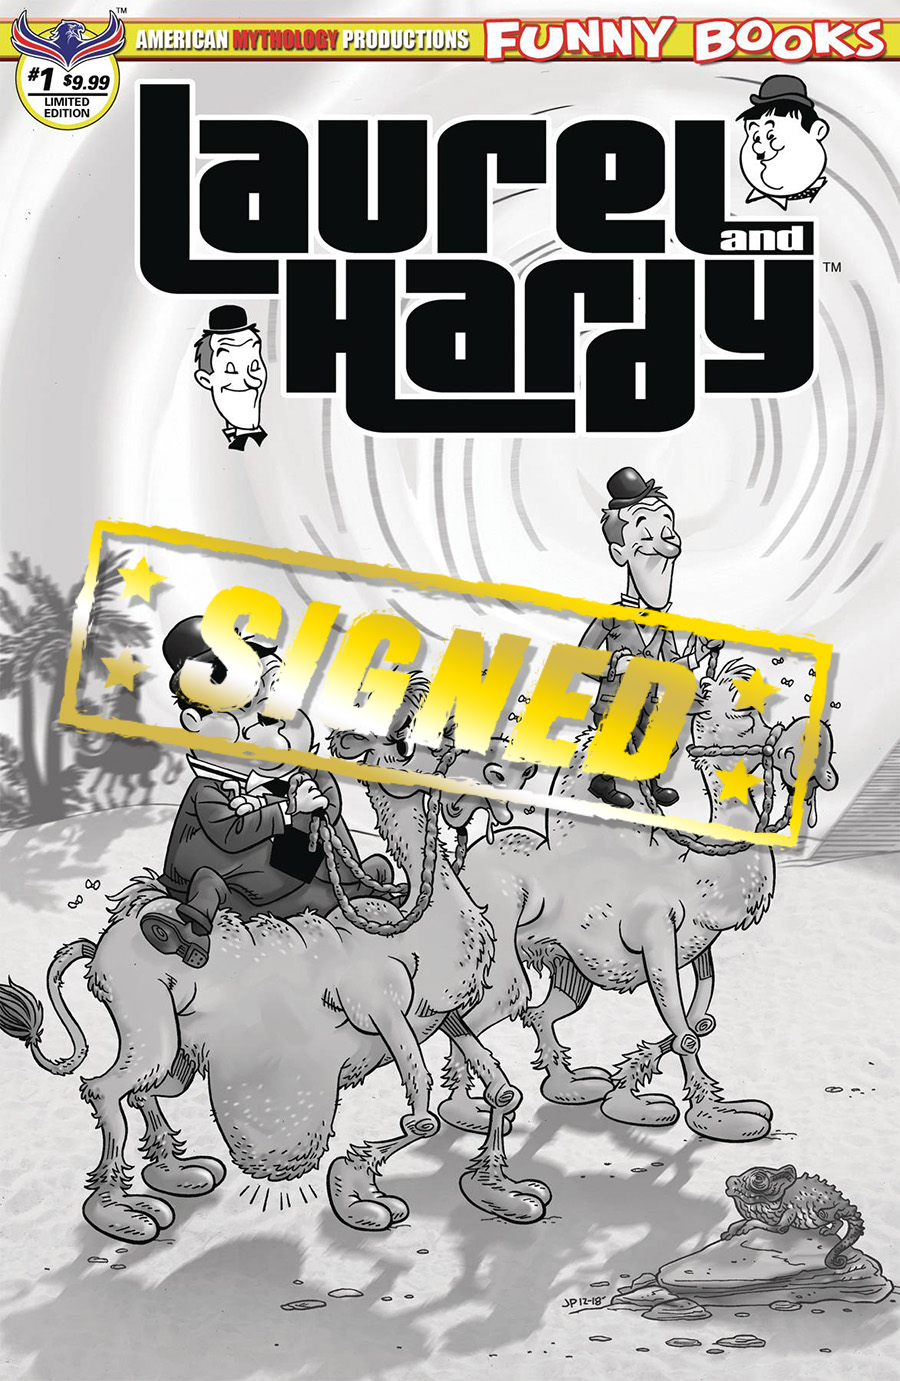 Laurel And Hardy Vol 2 #1 Cover D Limited Edition Jorge Pacheco Limited Edition Black & White Cover Signed By SA Check